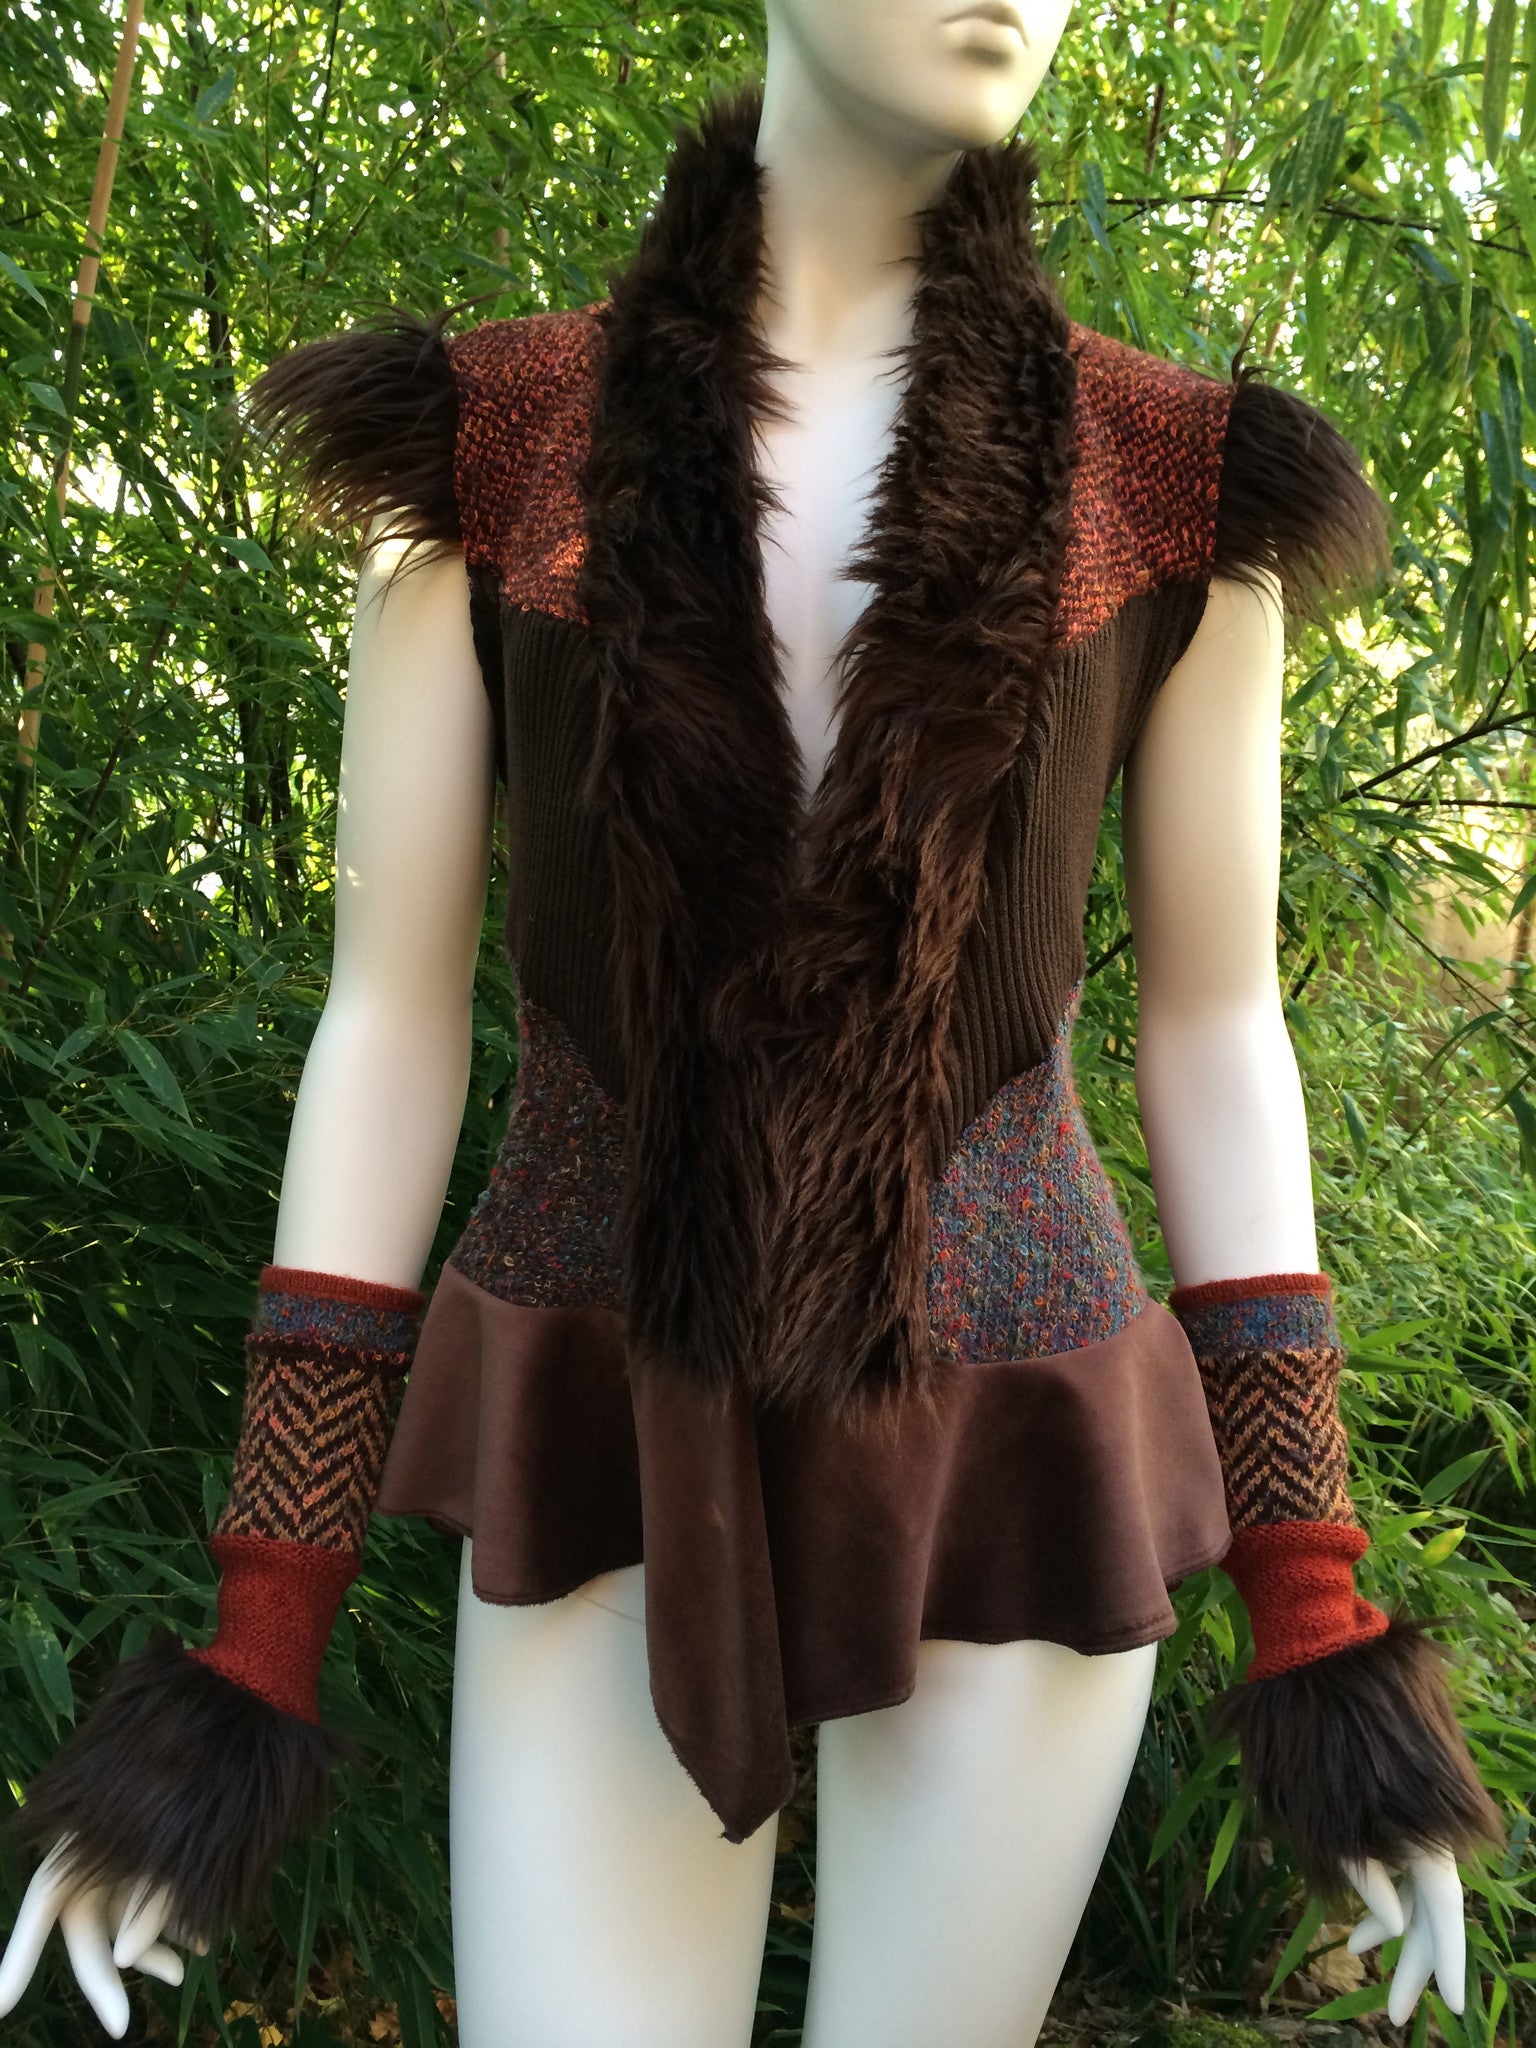 IPSEITY DESIGNS » Recycled Sweater Coats & Vests - Ipseity Designs